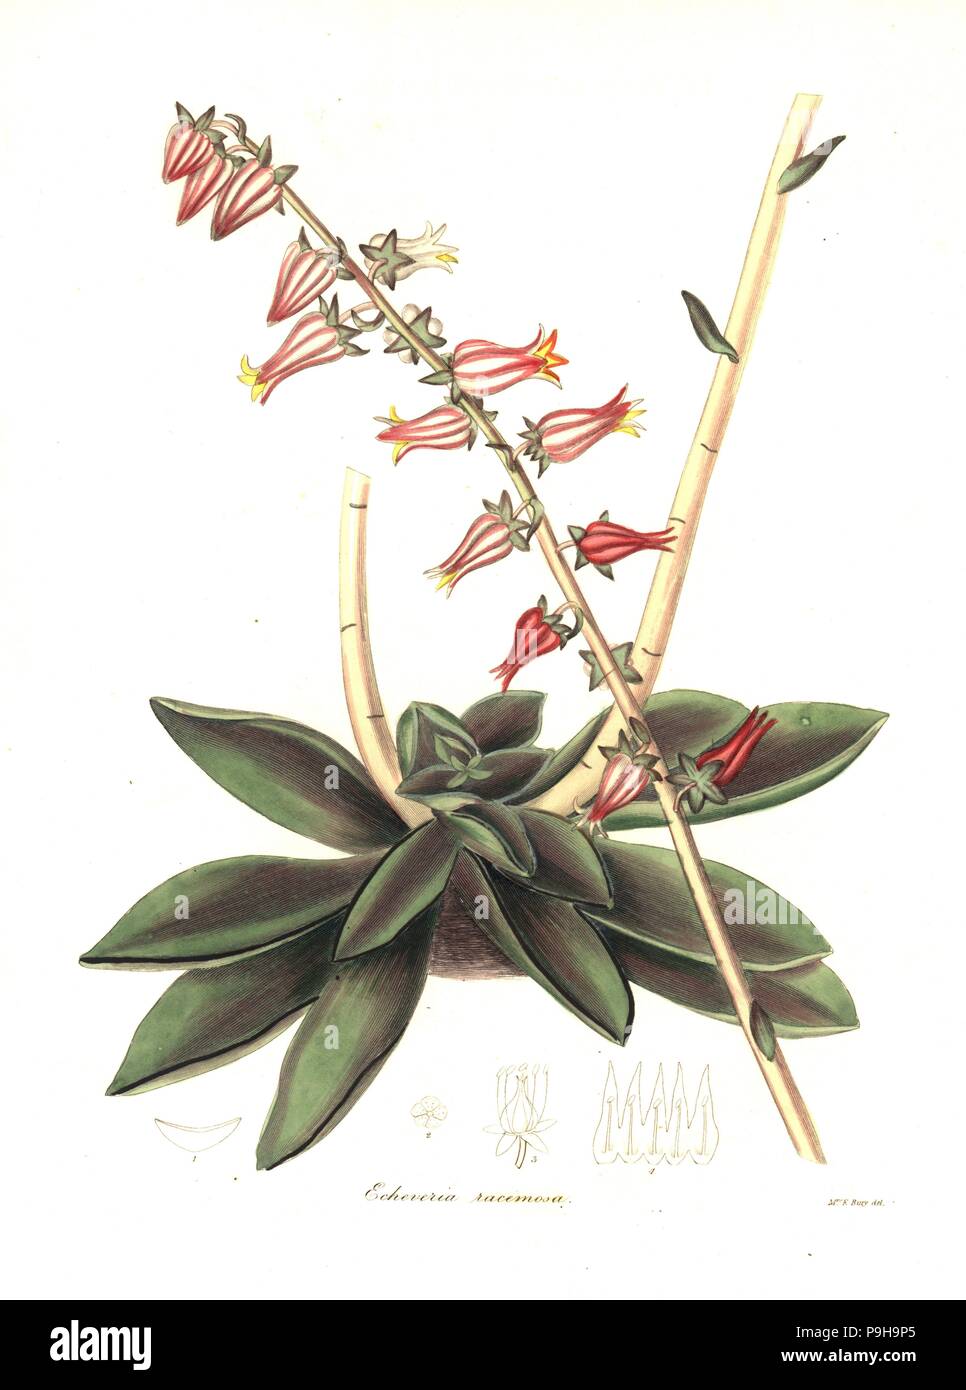 Racemose-flowered echeveria, Echeveria racemosa. Handcoloured copperplate engraving after a botanical illustration by Mrs Priscilla Bury from Benjamin Maund and the Rev. John Stevens Henslow's The Botanist, London, 1836. Stock Photo